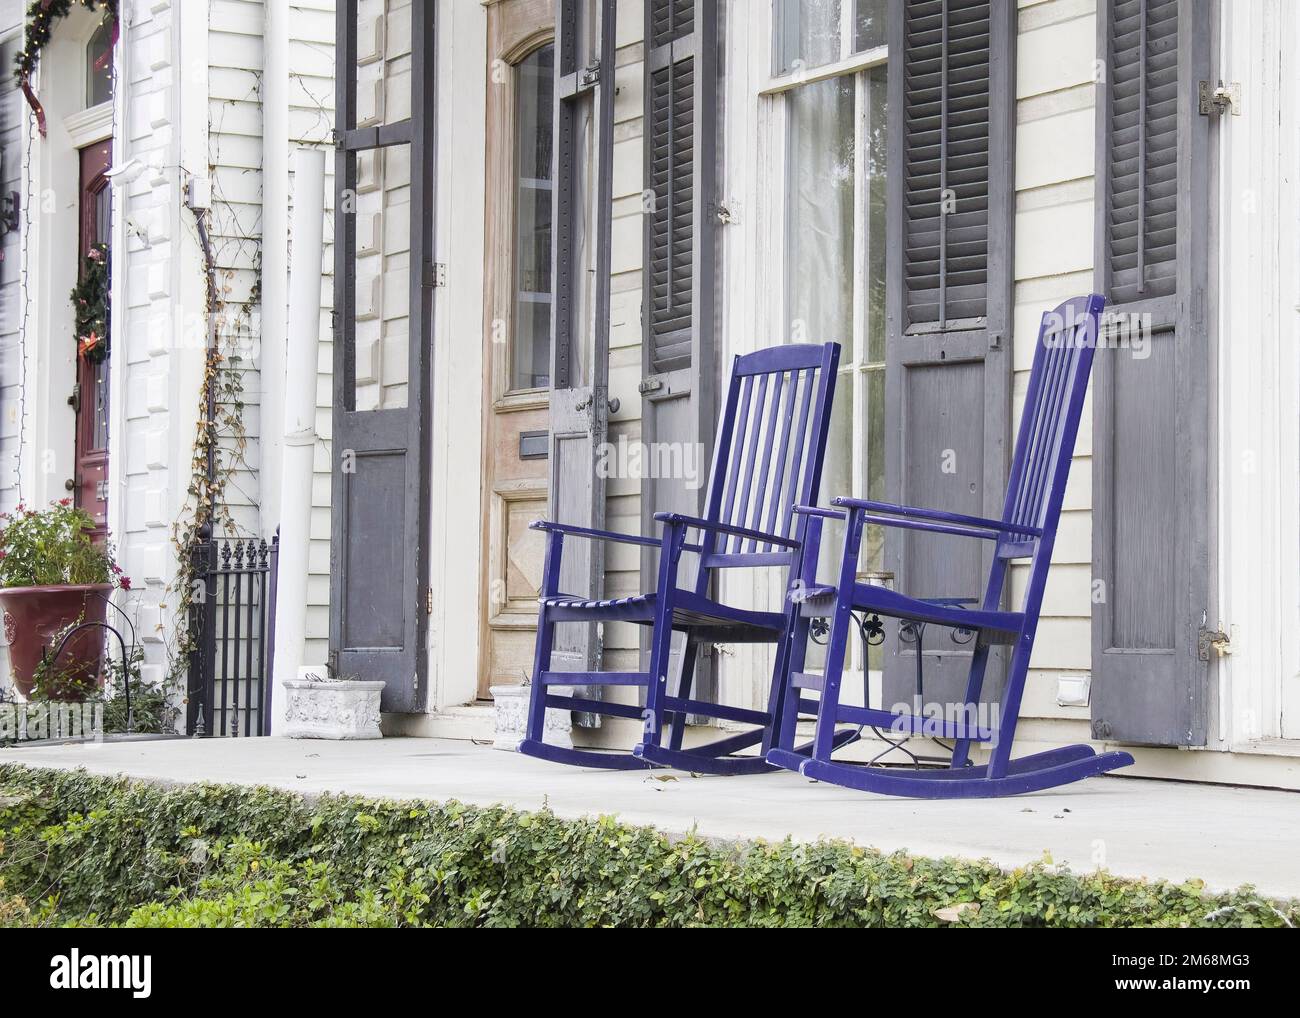 Two blue wooden rocking chairs on front porch of a southern USA colonial style home with grey shutters on windows and clapboard construct Stock Photo